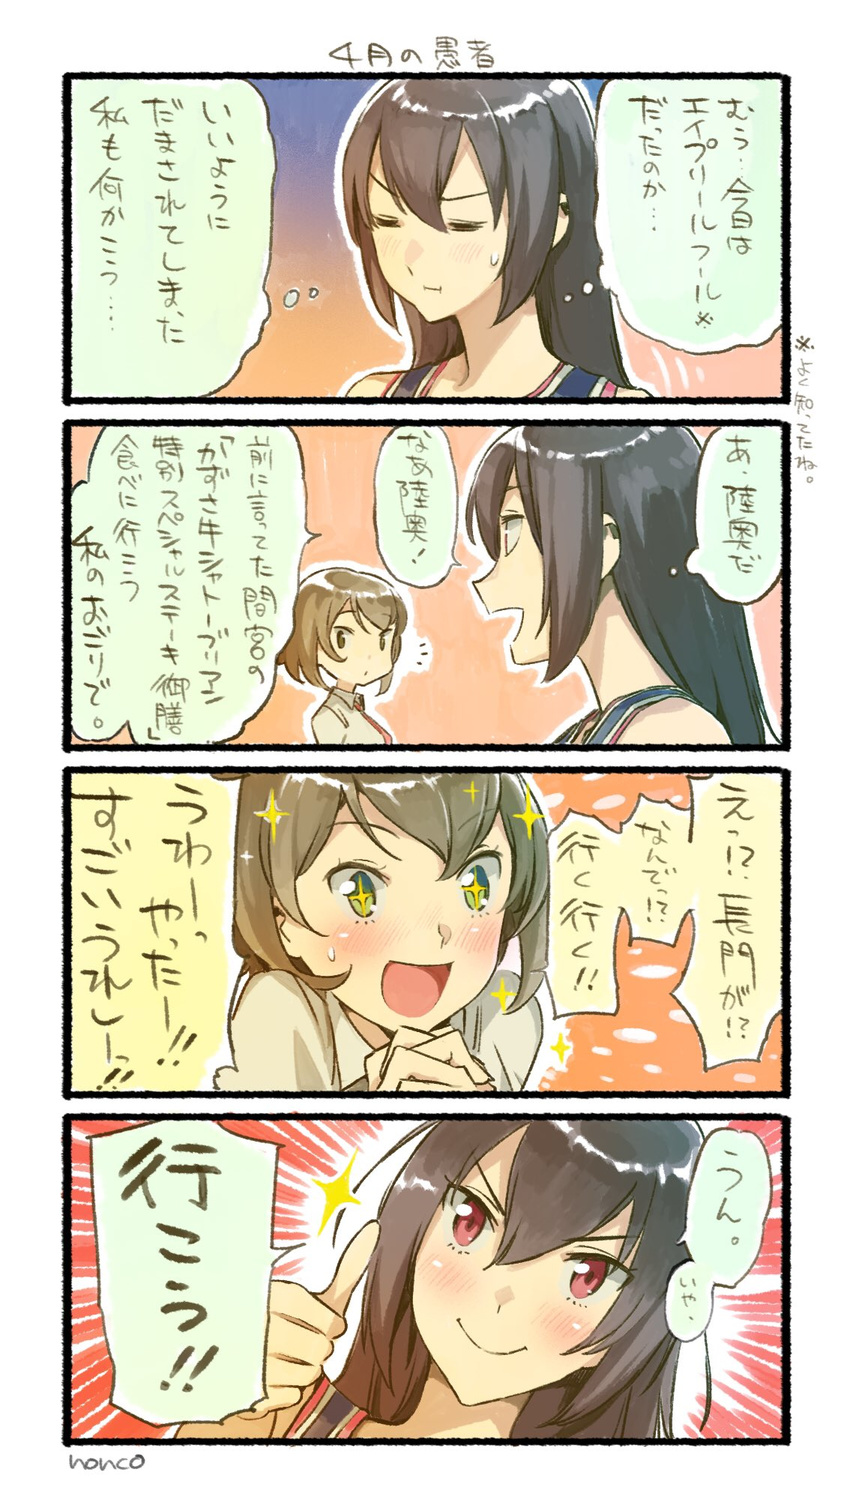 2girls 4koma alternate_costume april_fools bare_shoulders black_hair blush brown_hair check_commentary closed_eyes closed_mouth comic commentary commentary_request fingers_together green_eyes headgear_removed highres kantai_collection multiple_girls mutsu_(kantai_collection) nagato_(kantai_collection) nonco open_mouth red_eyes short_hair smile thumbs_up translated